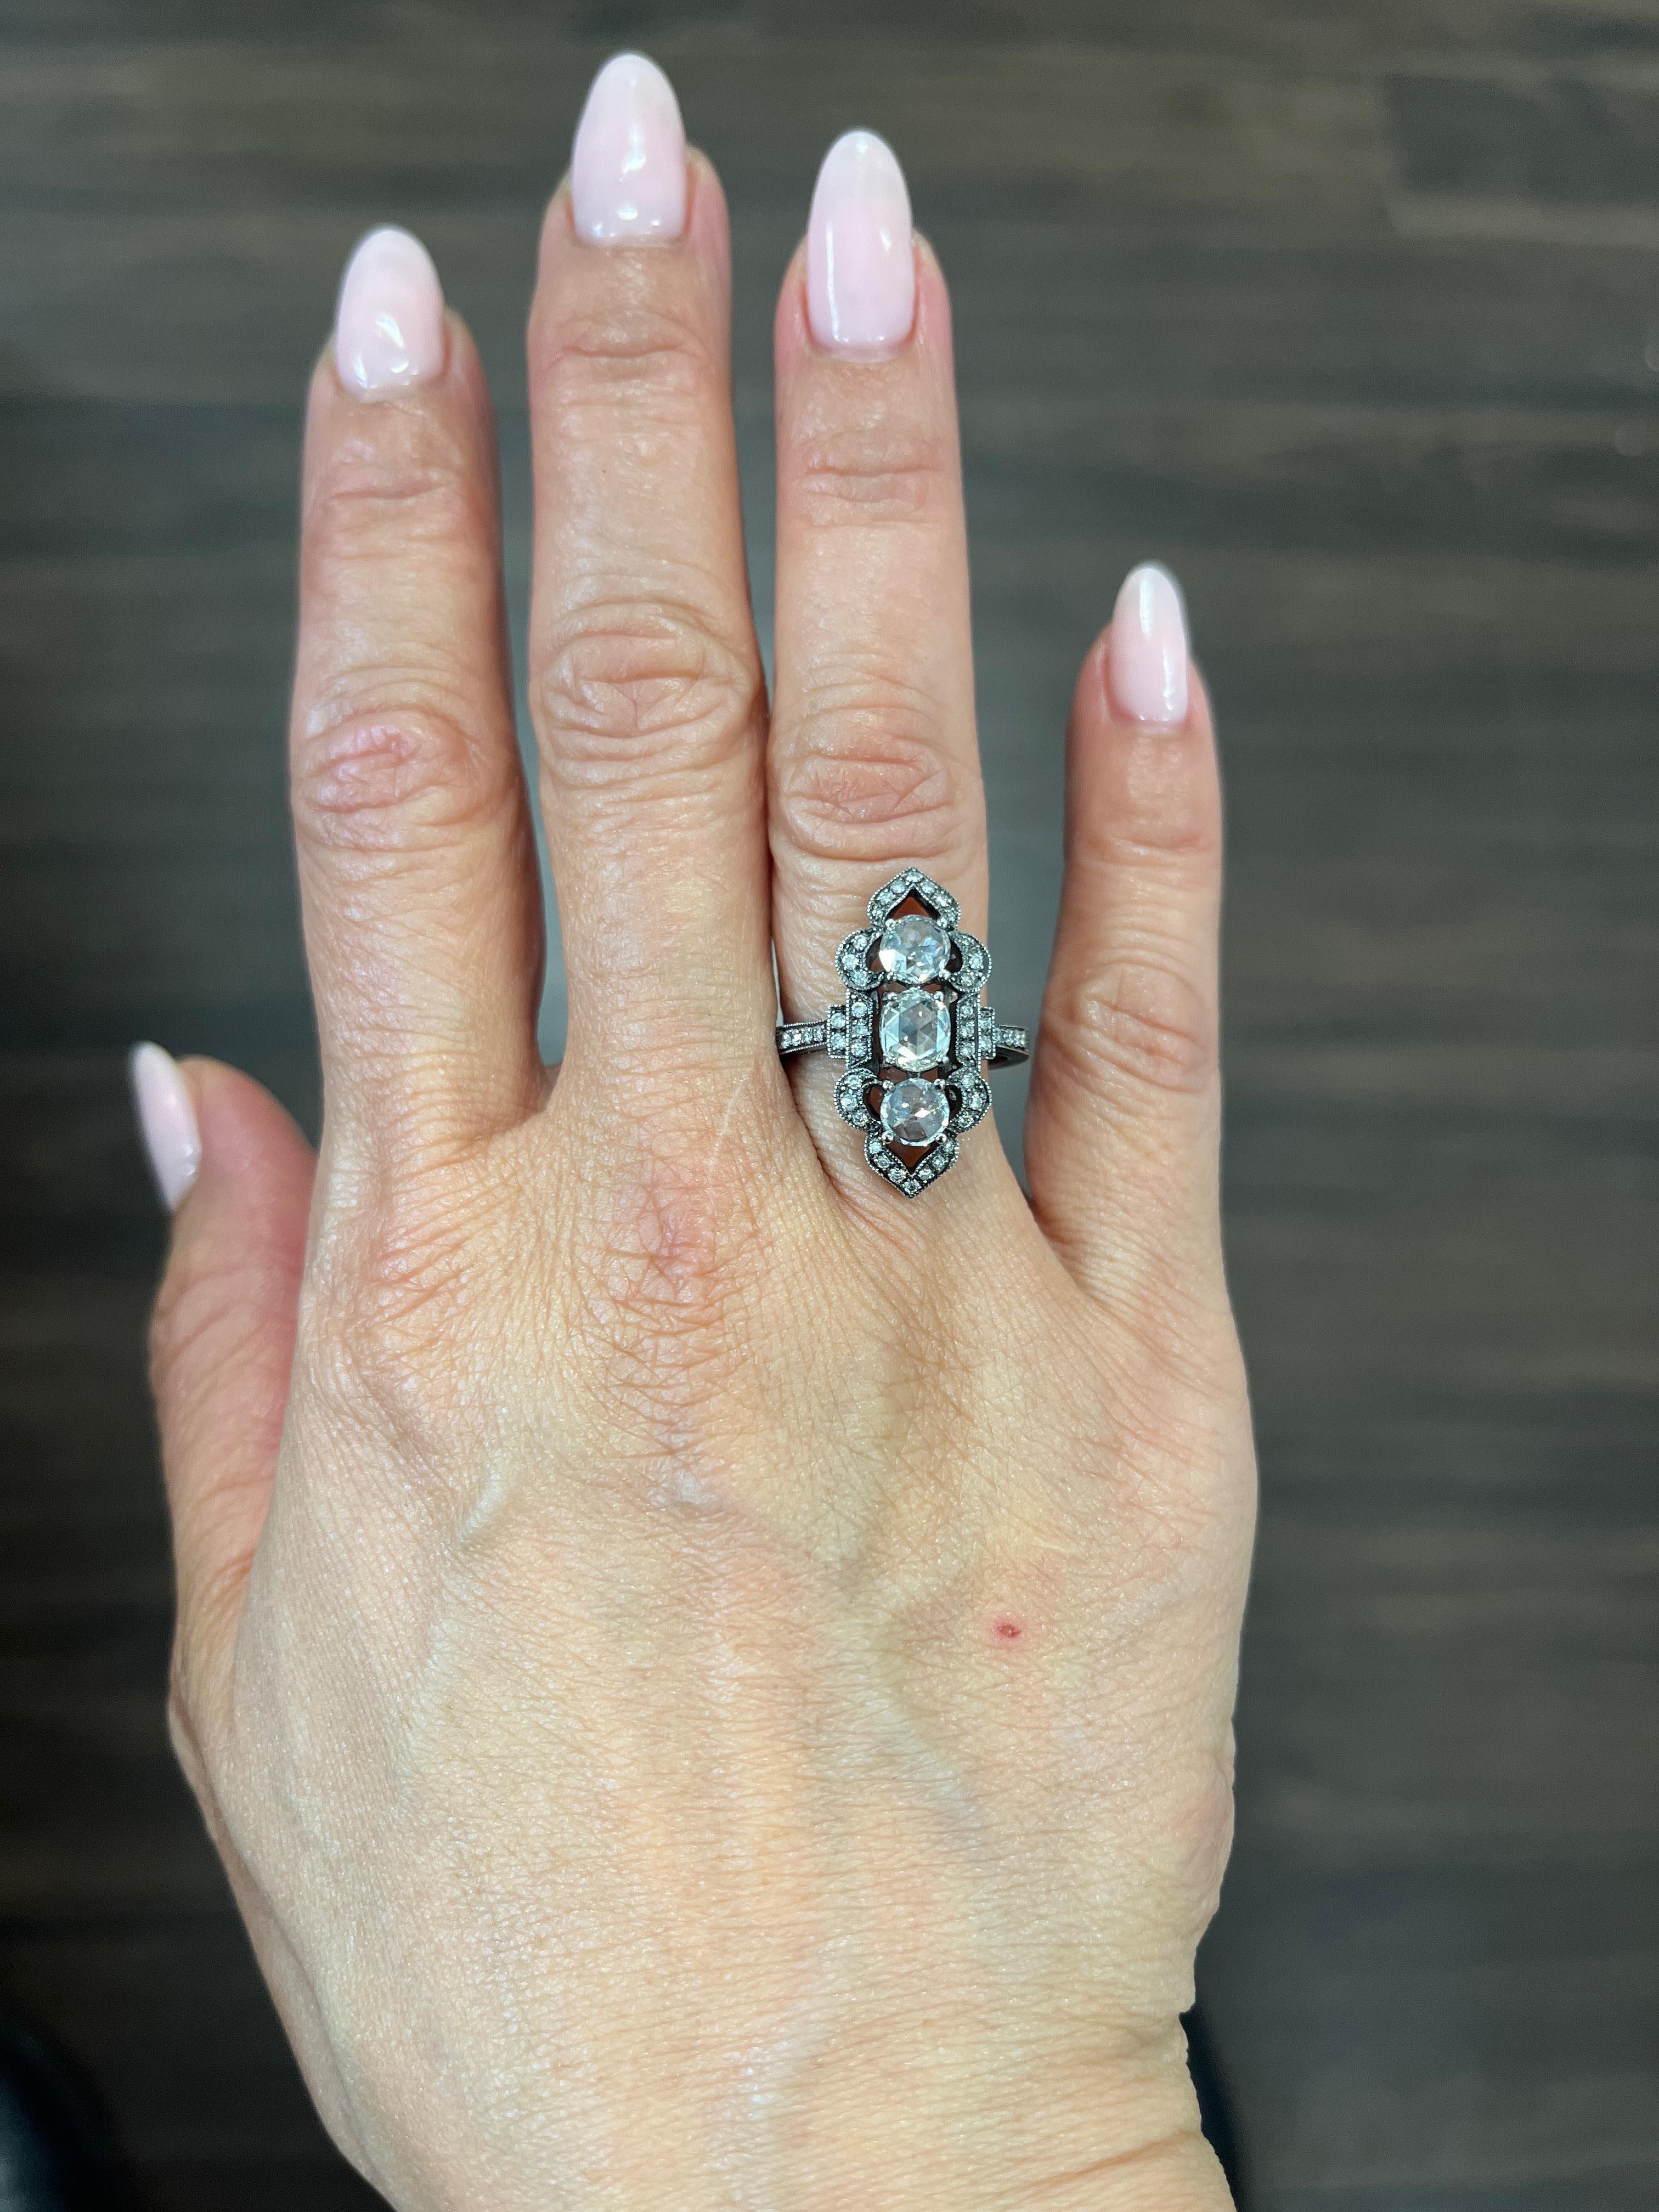 This exquisite ring boasts a stunning 1.93 carat total weight with rose cut diamonds set in 18k white gold. The diamond's clarity grade falls in the VS2/SI1 range and has a beautiful H/I color grade. The ring is also accented with 47 additional